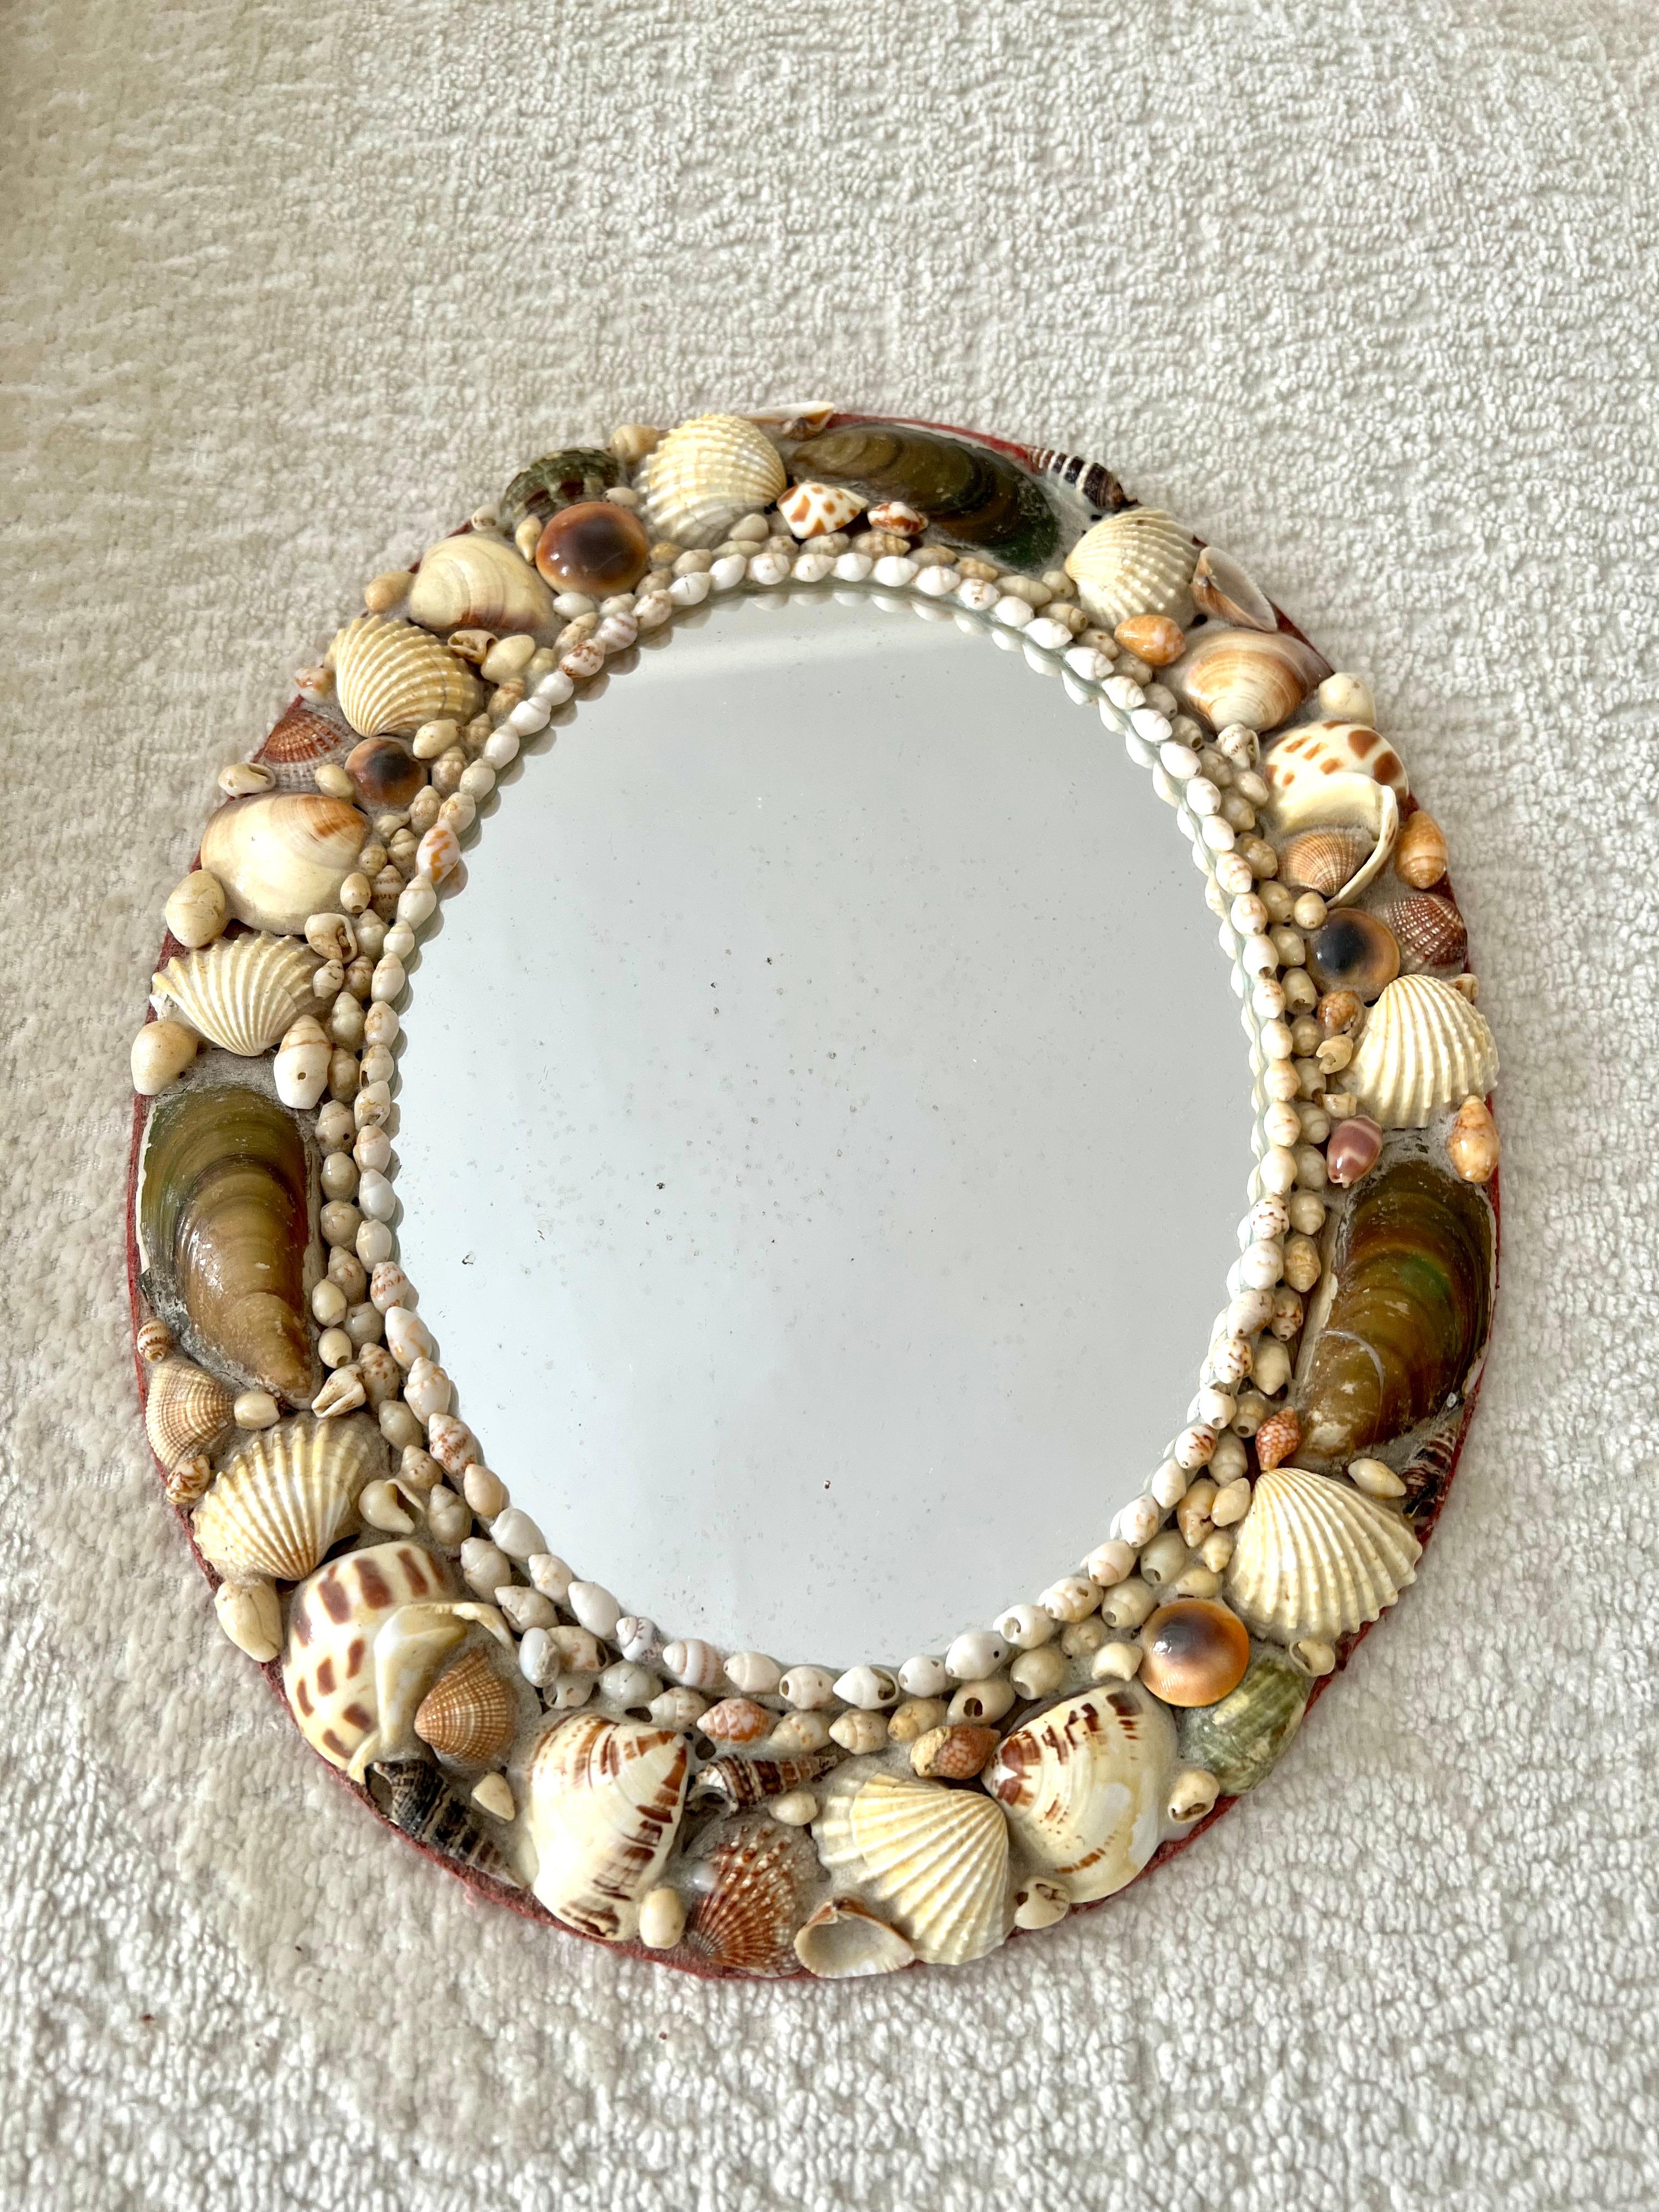 A small shell encrusted frame - a vintage and folk art piece with a red felt back. The piece is lovely for a bathroom, or dressing area - also would work well on any wall that wants a bit of diversity or is near the water.

A compliment to many